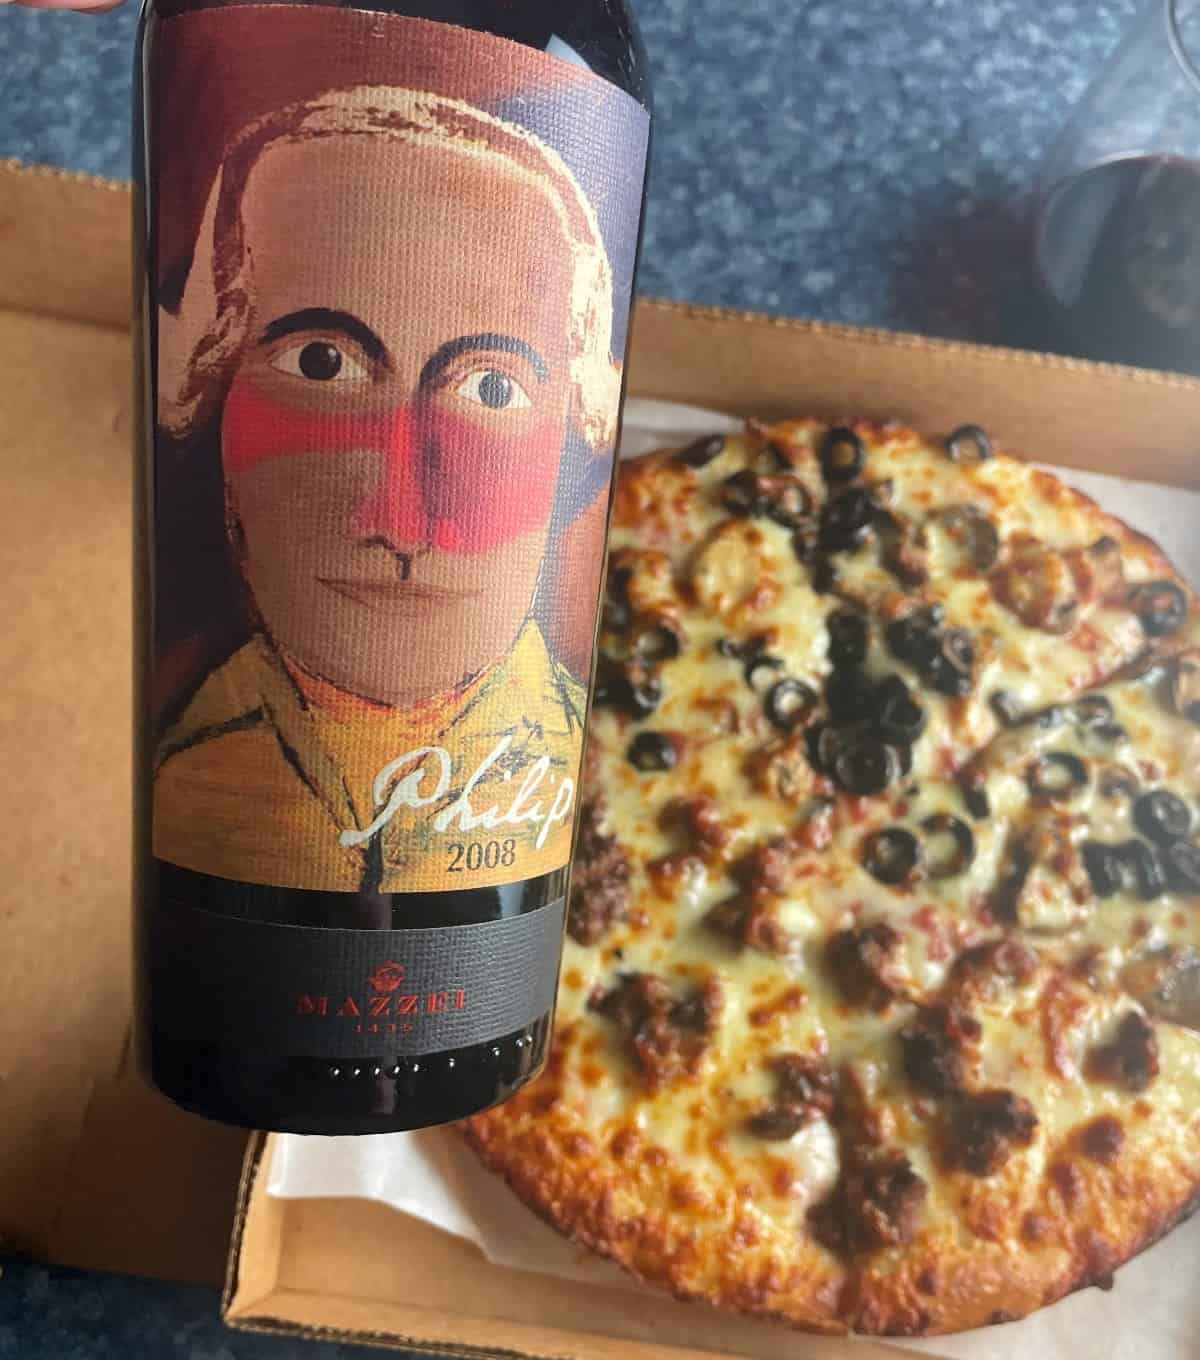 A bottle of 2008 Philip Cabernet Toscana, shown above a box of takeout pizza.